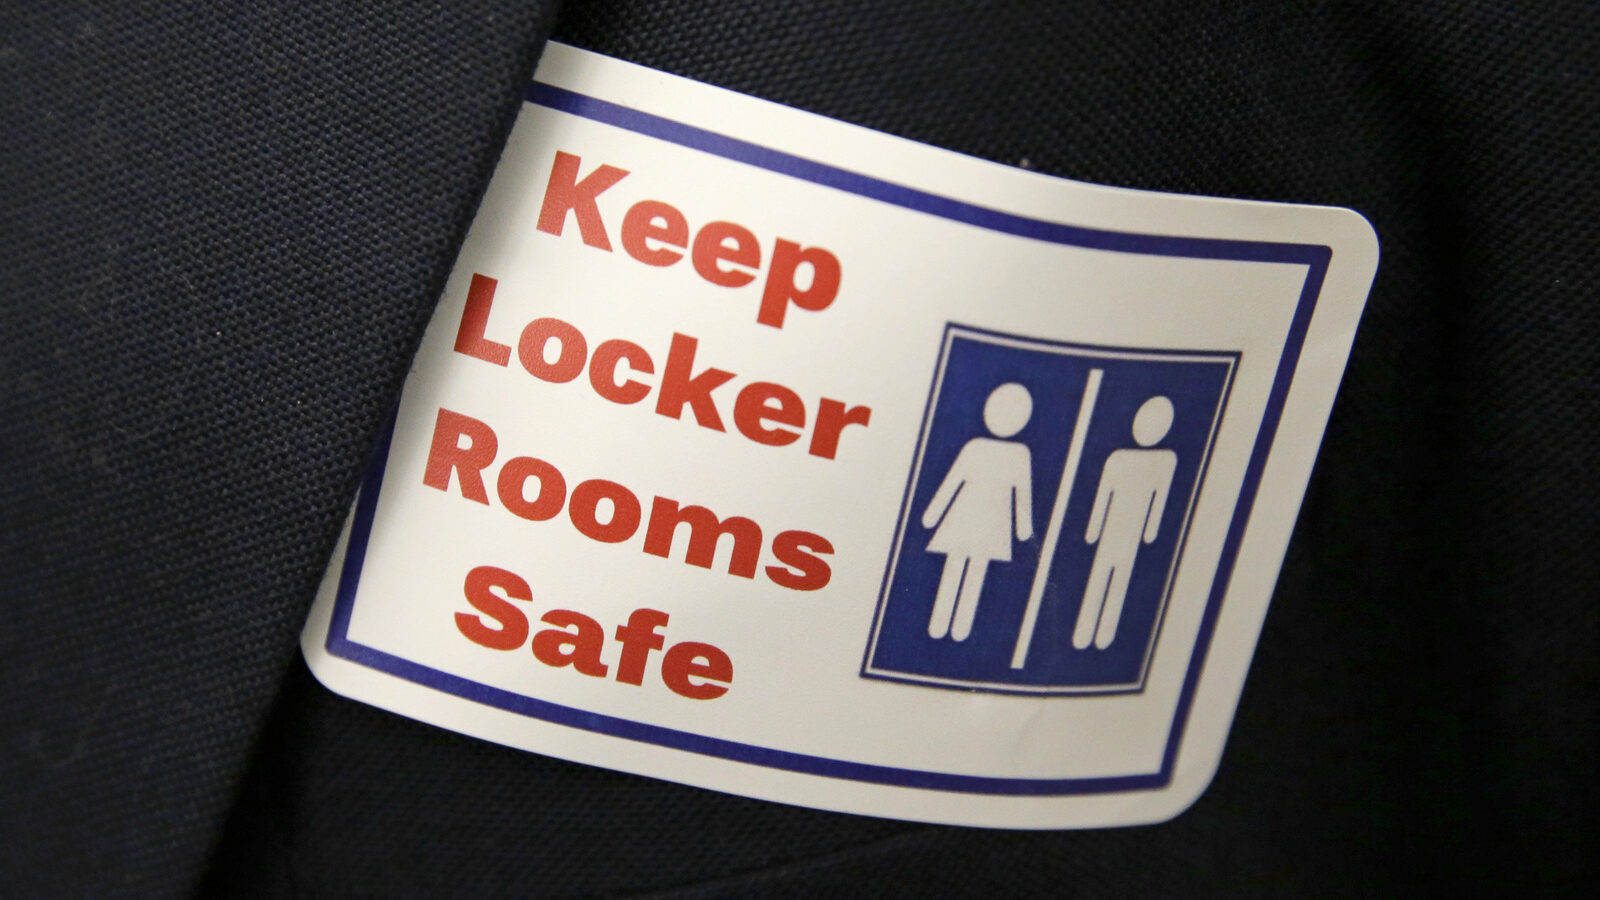 A sticker that reads, "Keep Locker Rooms Safe," is worn by a person supporting a bill that would eliminate Washington's new rule allowing transgender people use gender-segregated bathrooms and locker rooms in public buildings consistent with their gender identity, Wednesday, Jan. 27, 2016, outside a Washington Senate hearing room at the Capitol in Olympia, Wash.